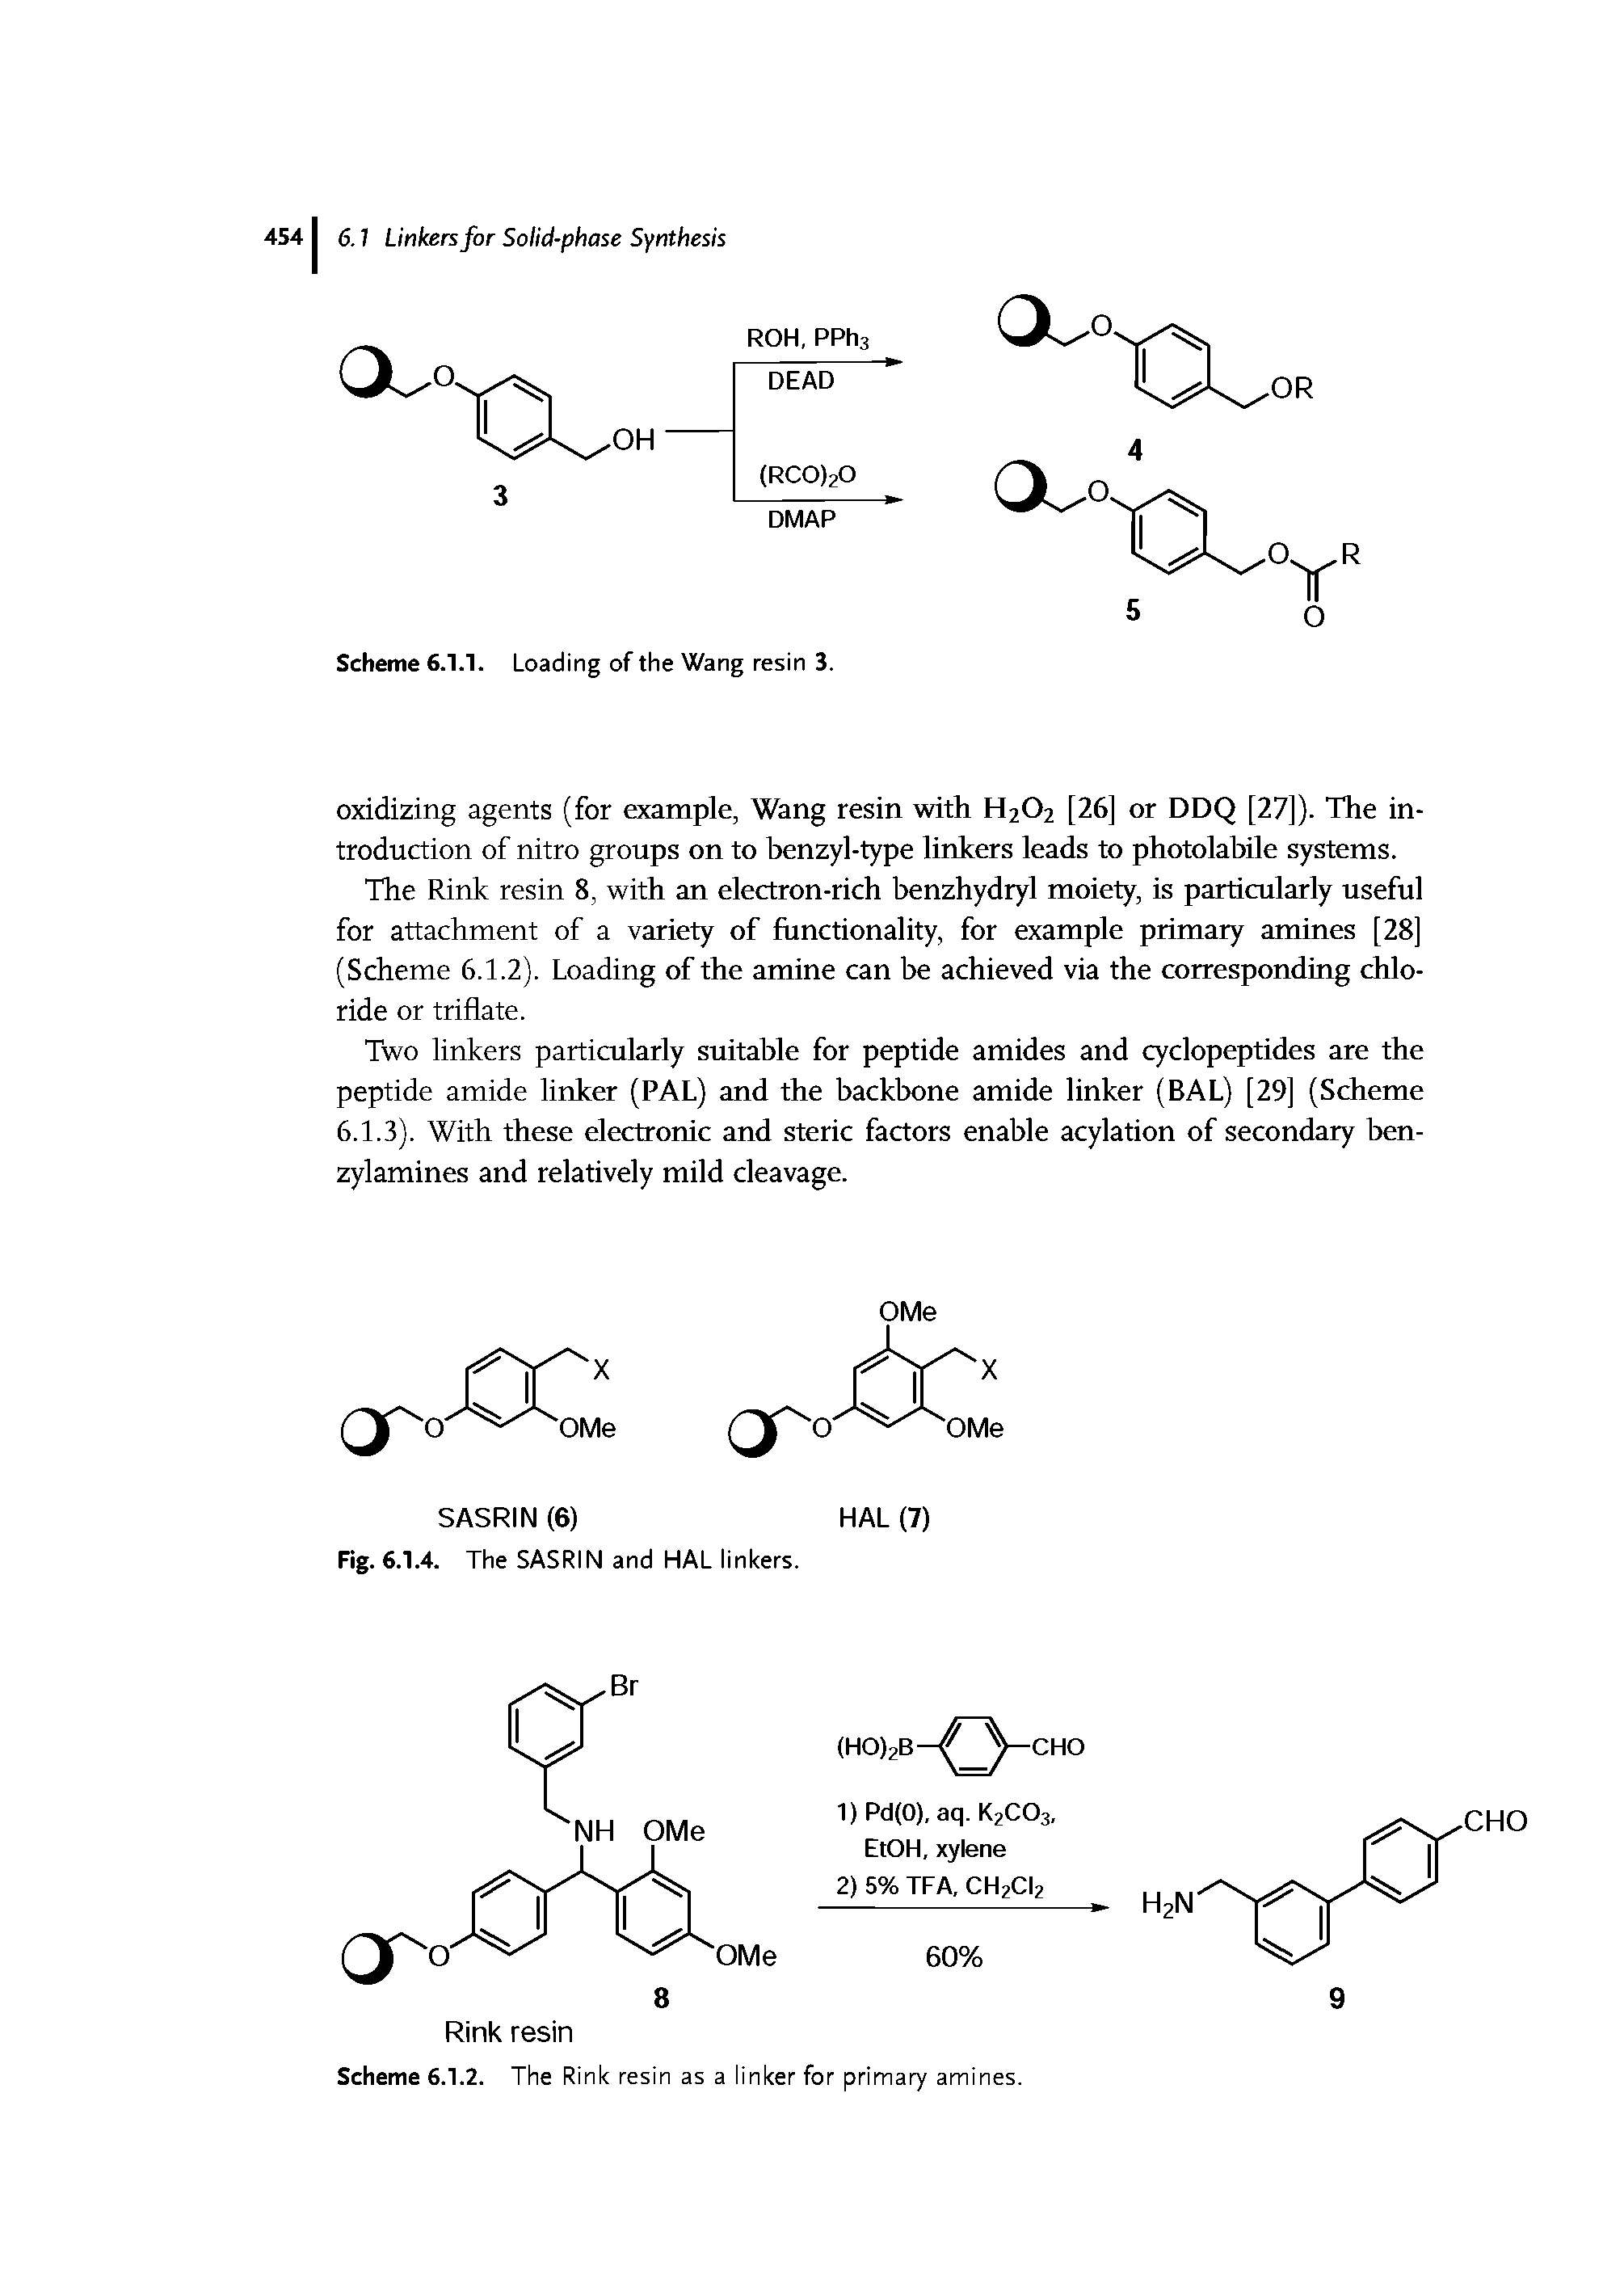 Scheme 6.1.2. The Rink resin as a linker for primary amines.